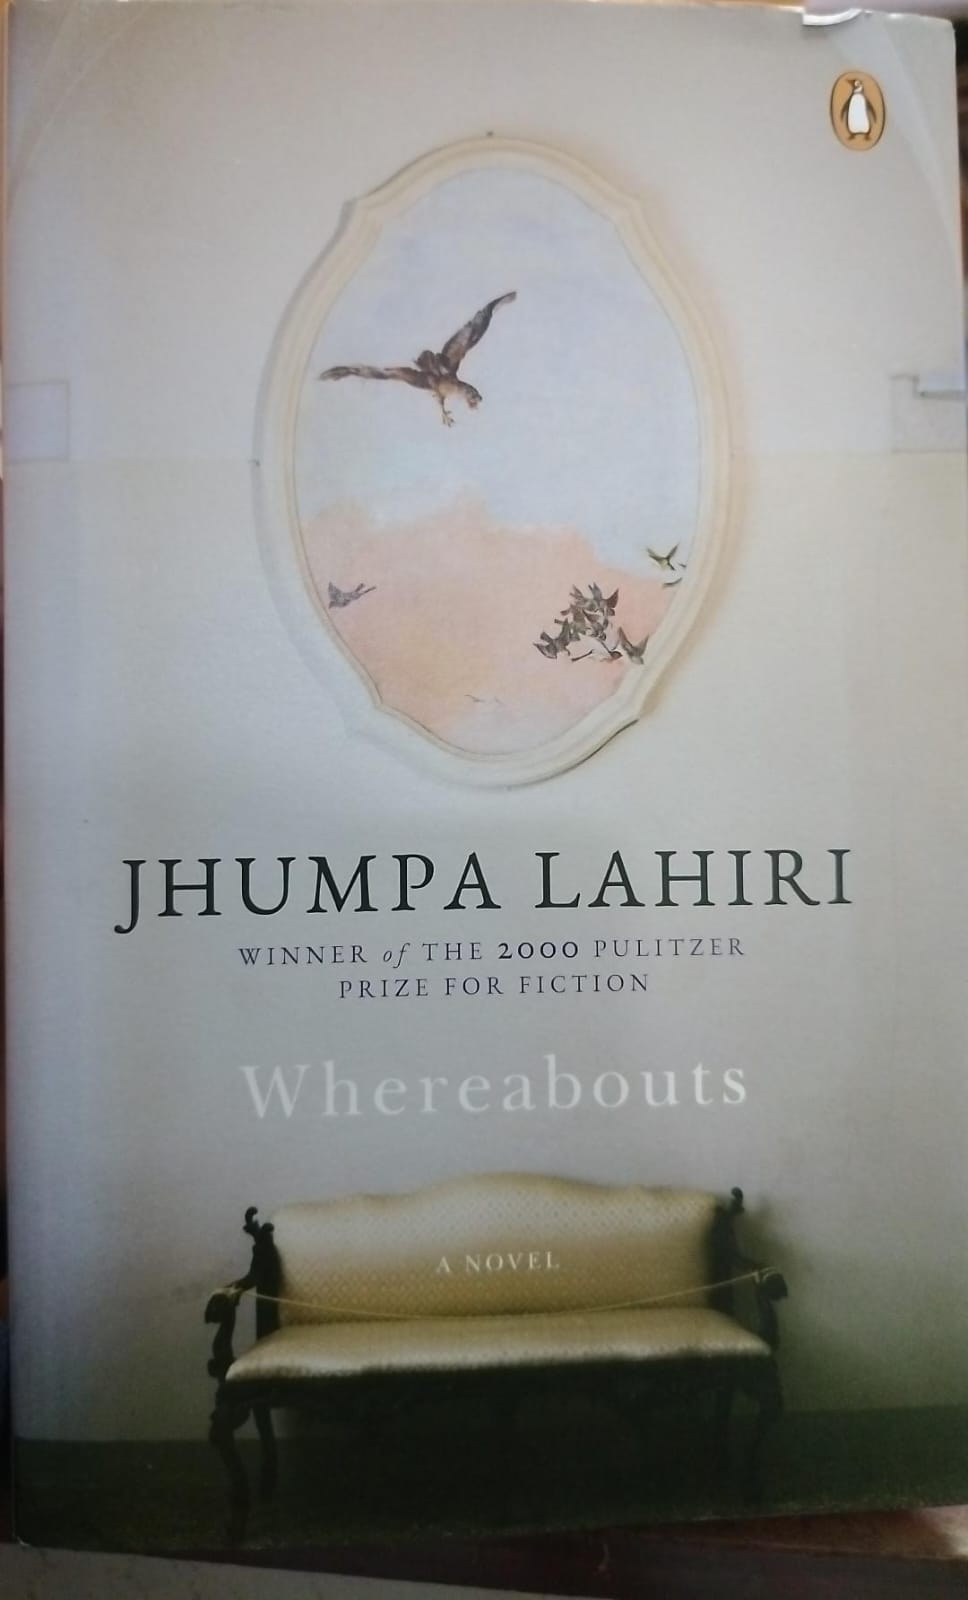 (Used) Whereabouts: A Novel (Hardcover)